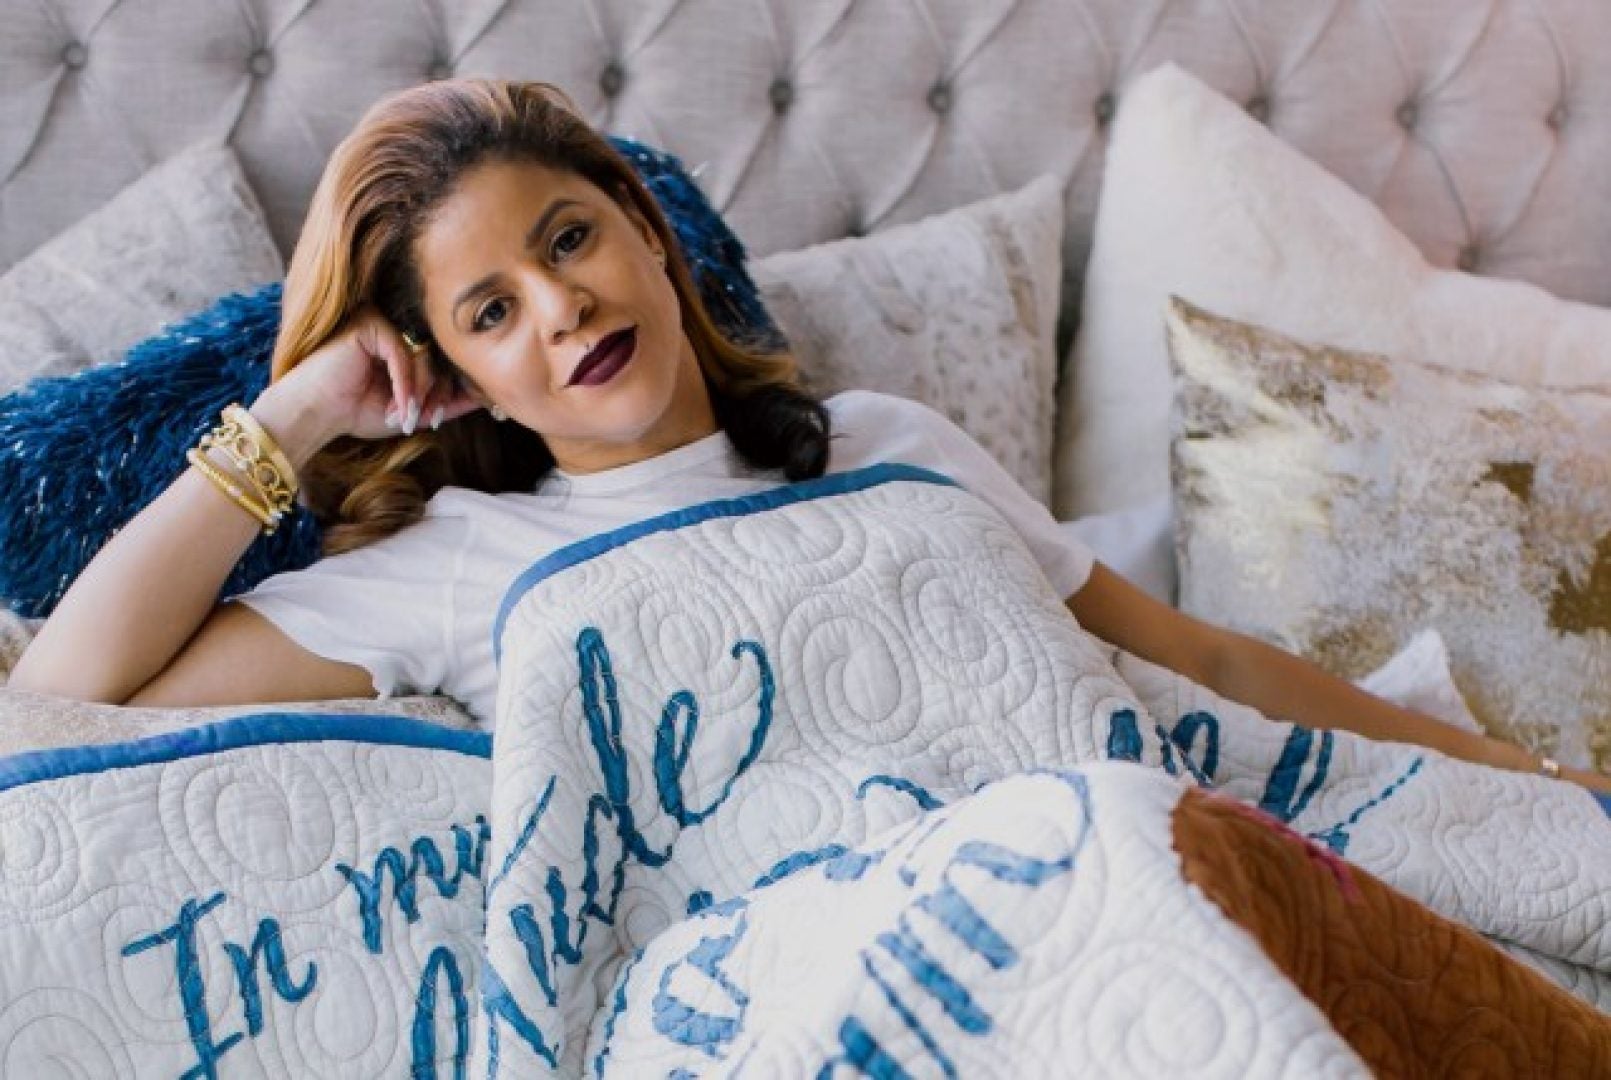 From Burnout To Quilt Queen, This Entrepreneur’s Story Will Inspire You